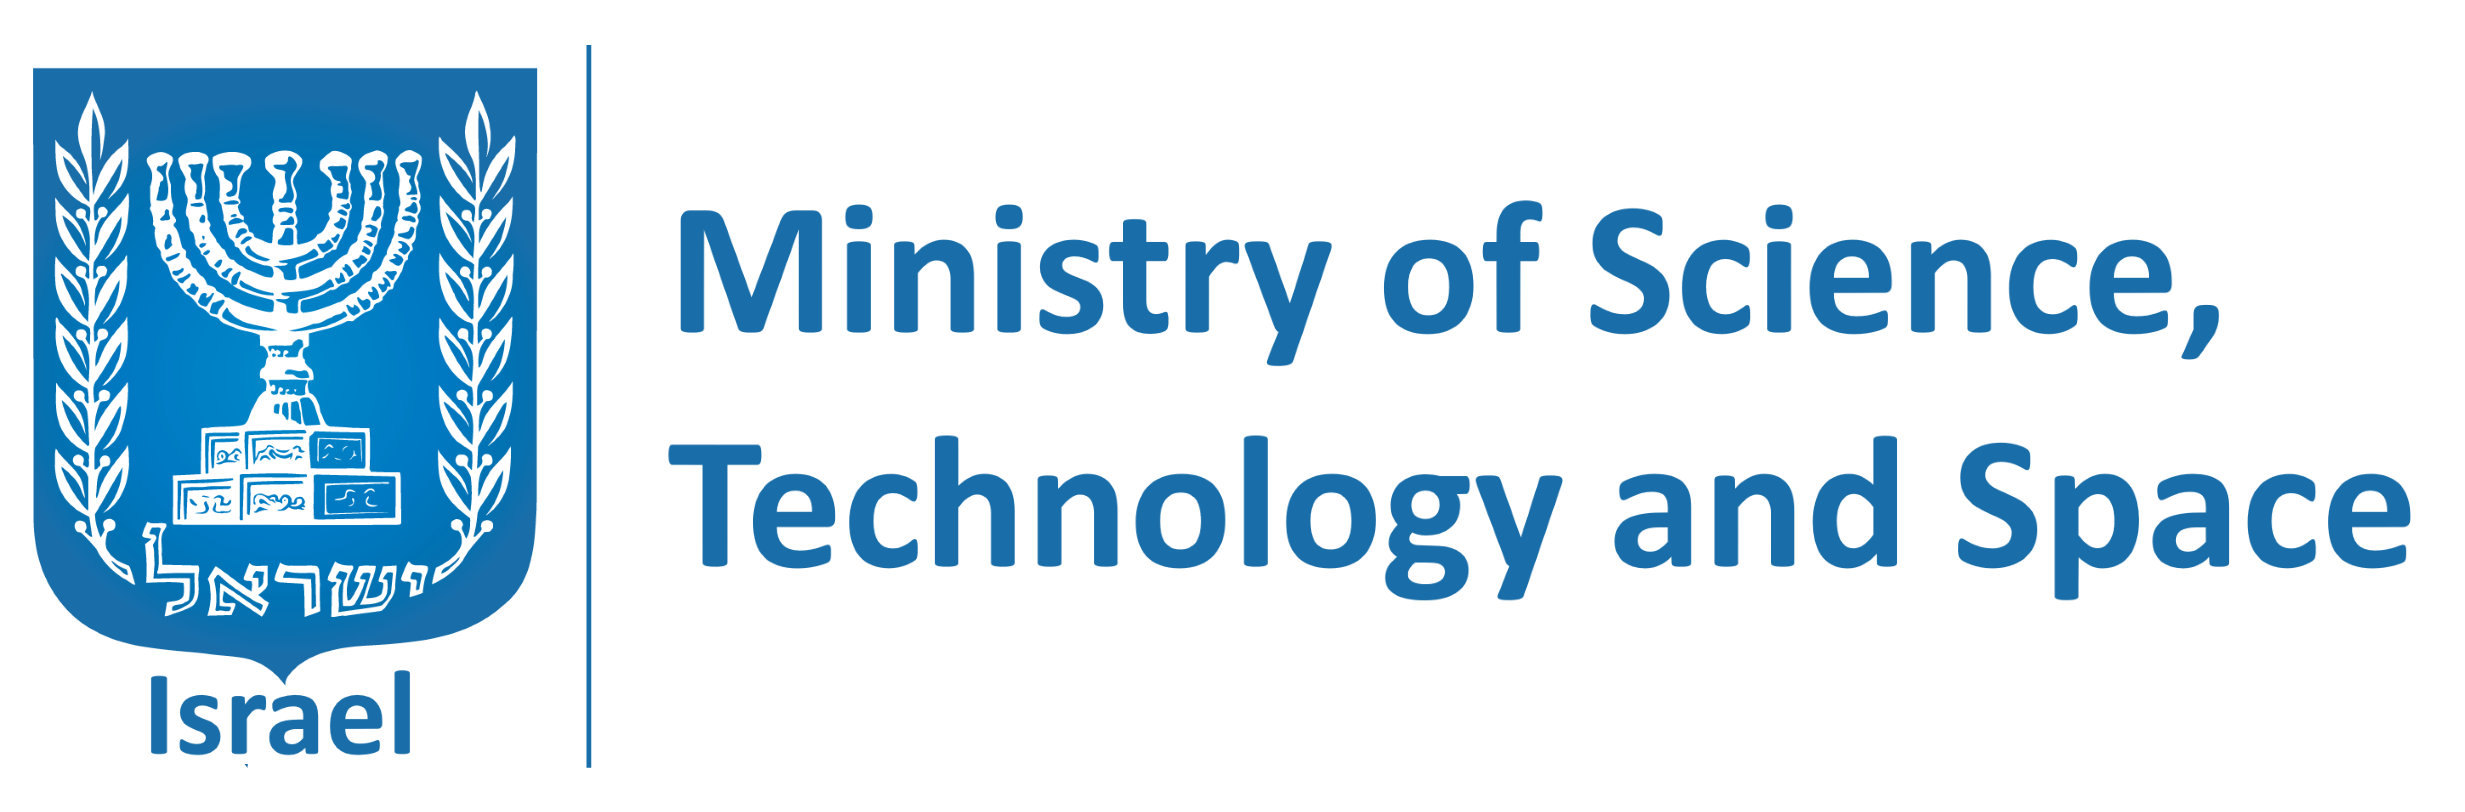 ministry of science and technology